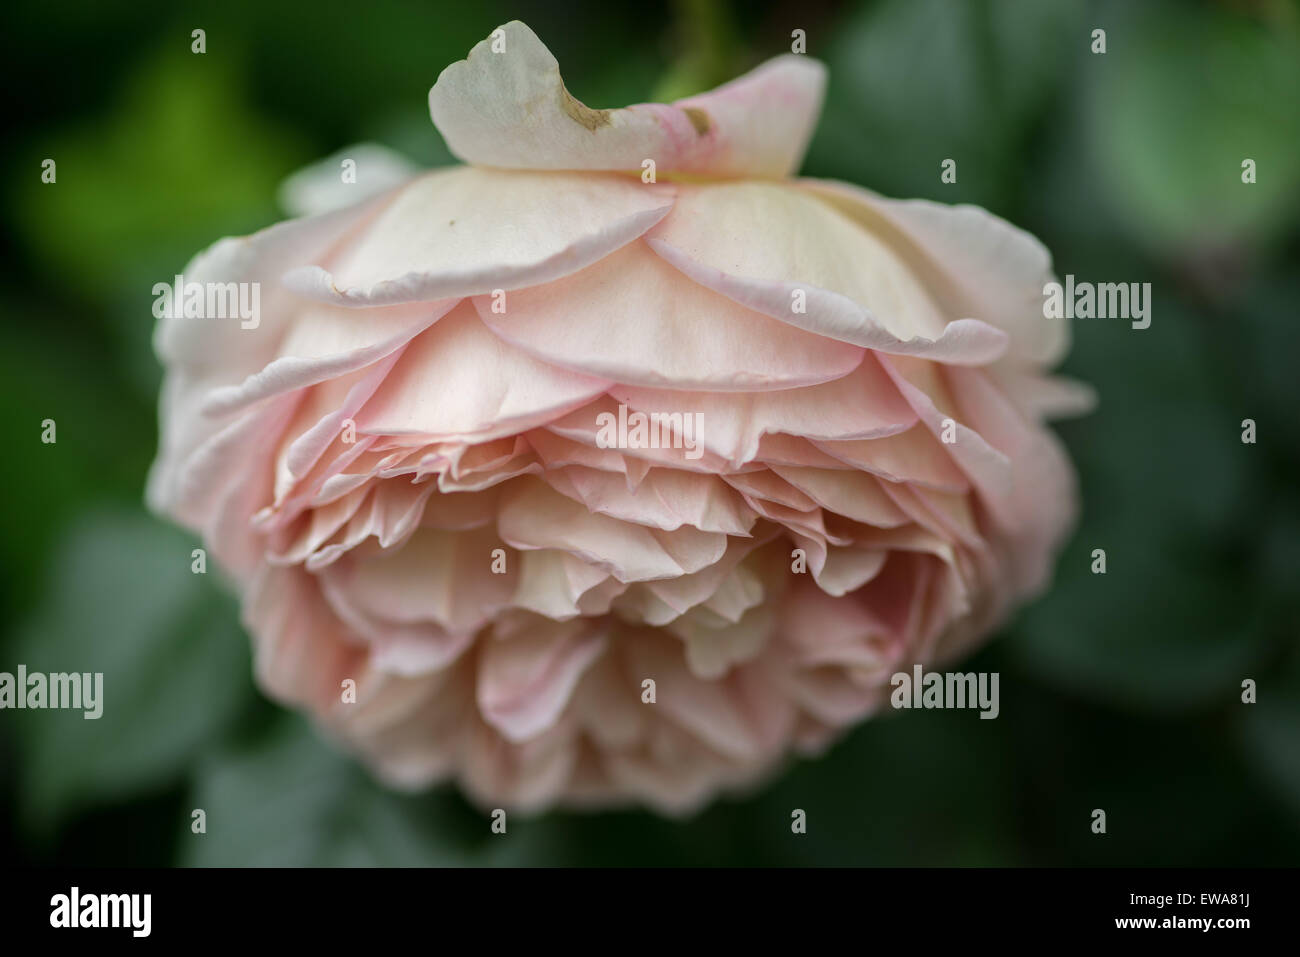 Graceful pale pink rose close up Stock Photo